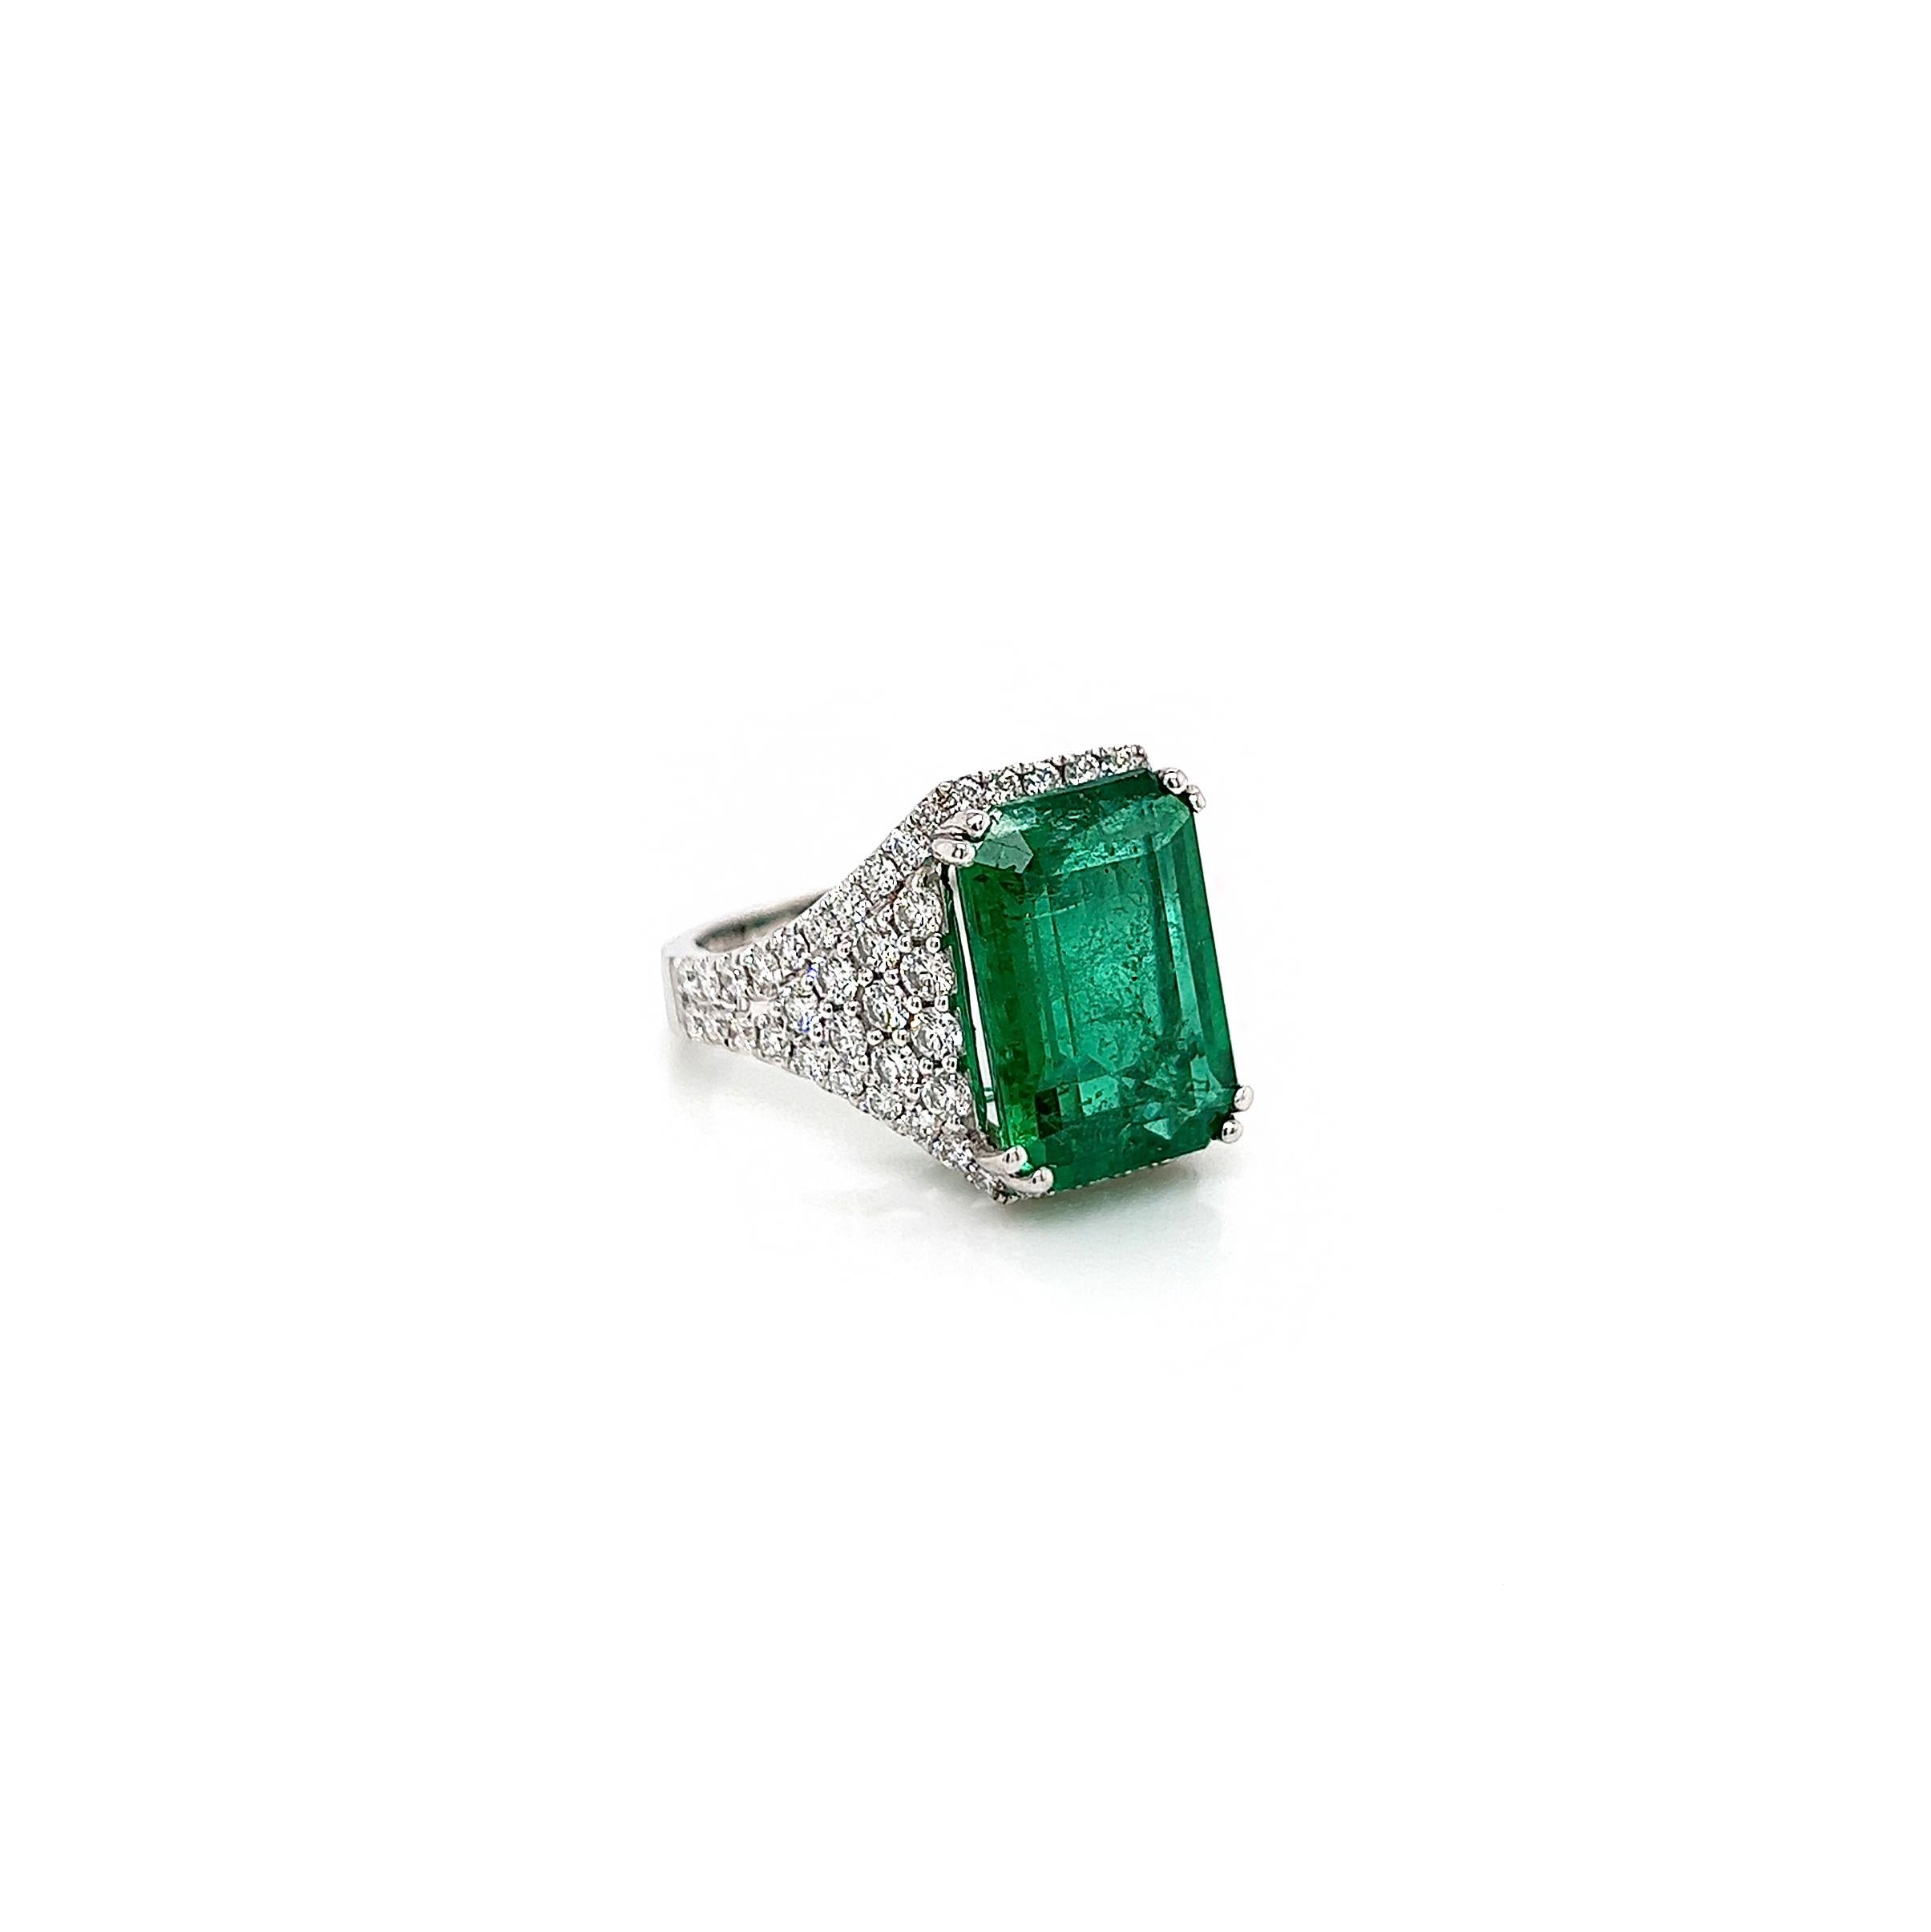 Emerald Cut 8.65 Total Carat Emerald and Diamond Pave-Set Ladies Ring GIA For Sale